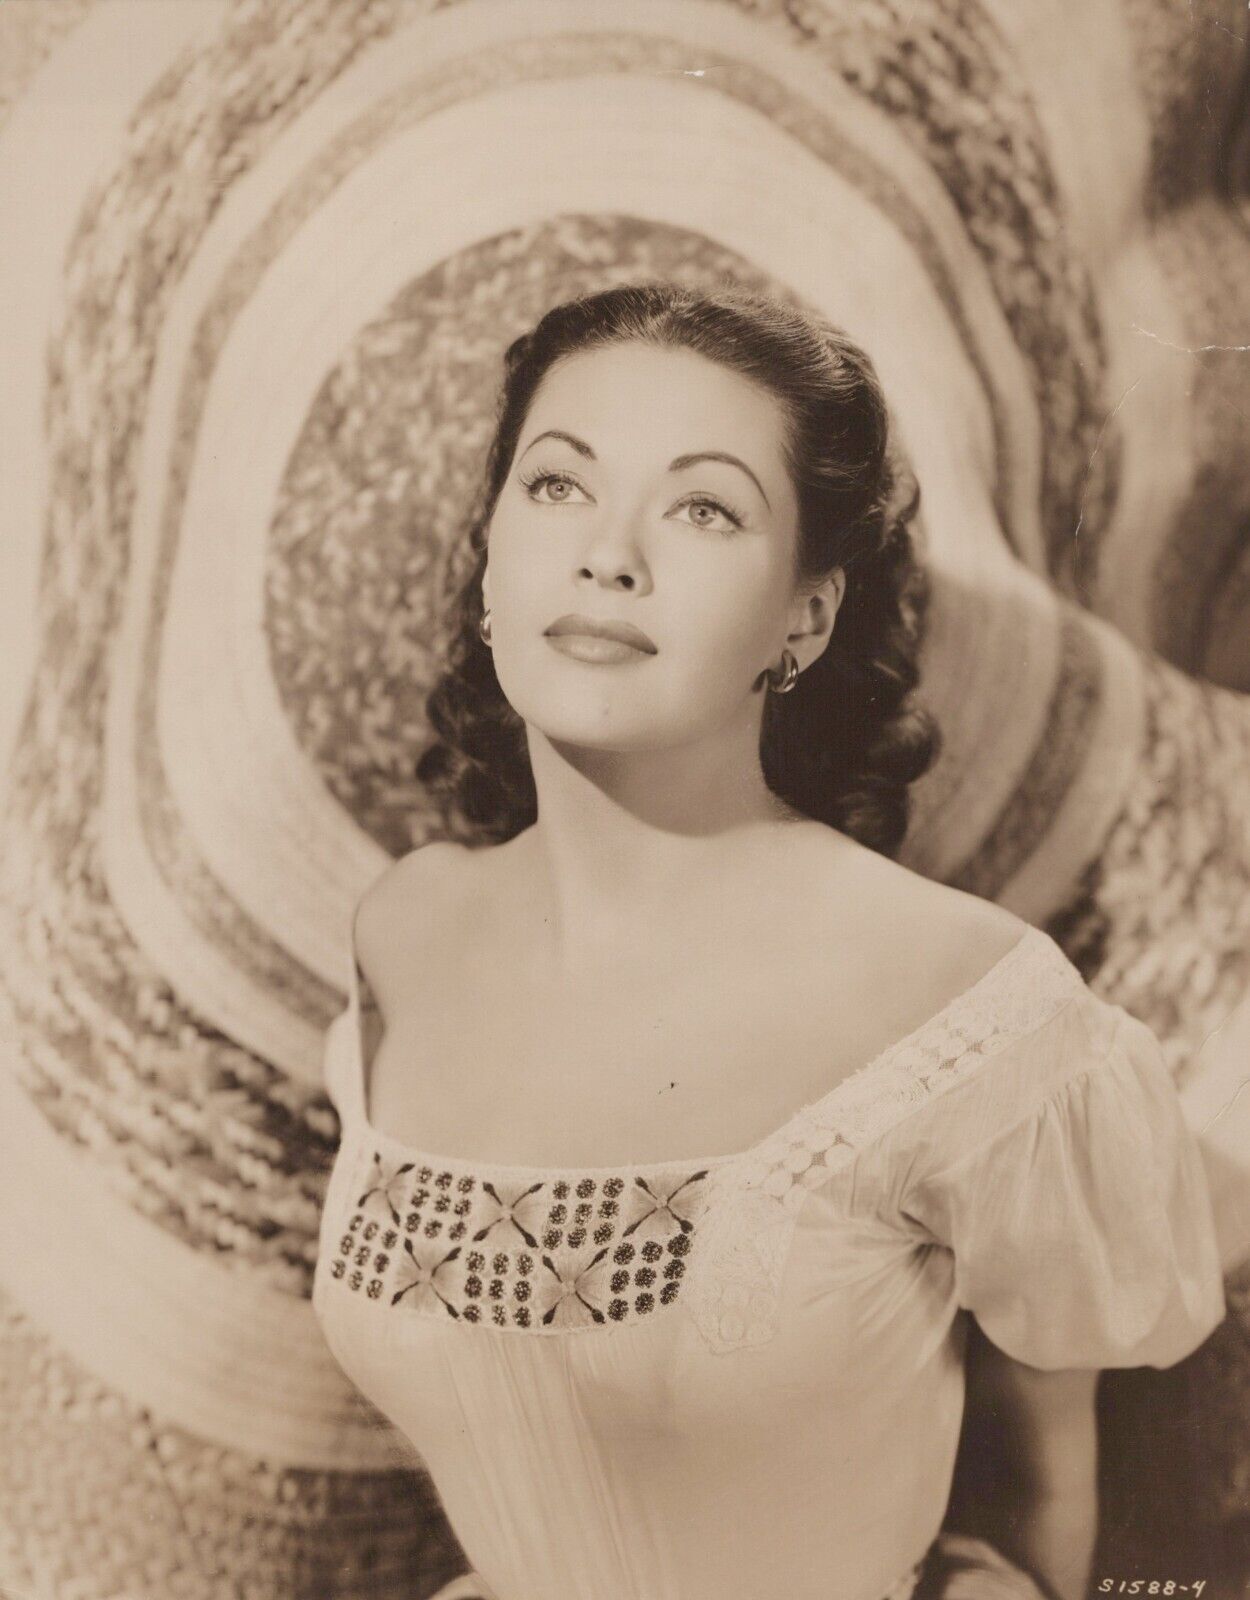 Yvonne De Carlo (1953) ⭐🎬 Beauty Hollywood Actress - Iconic Vintage Photo K 181